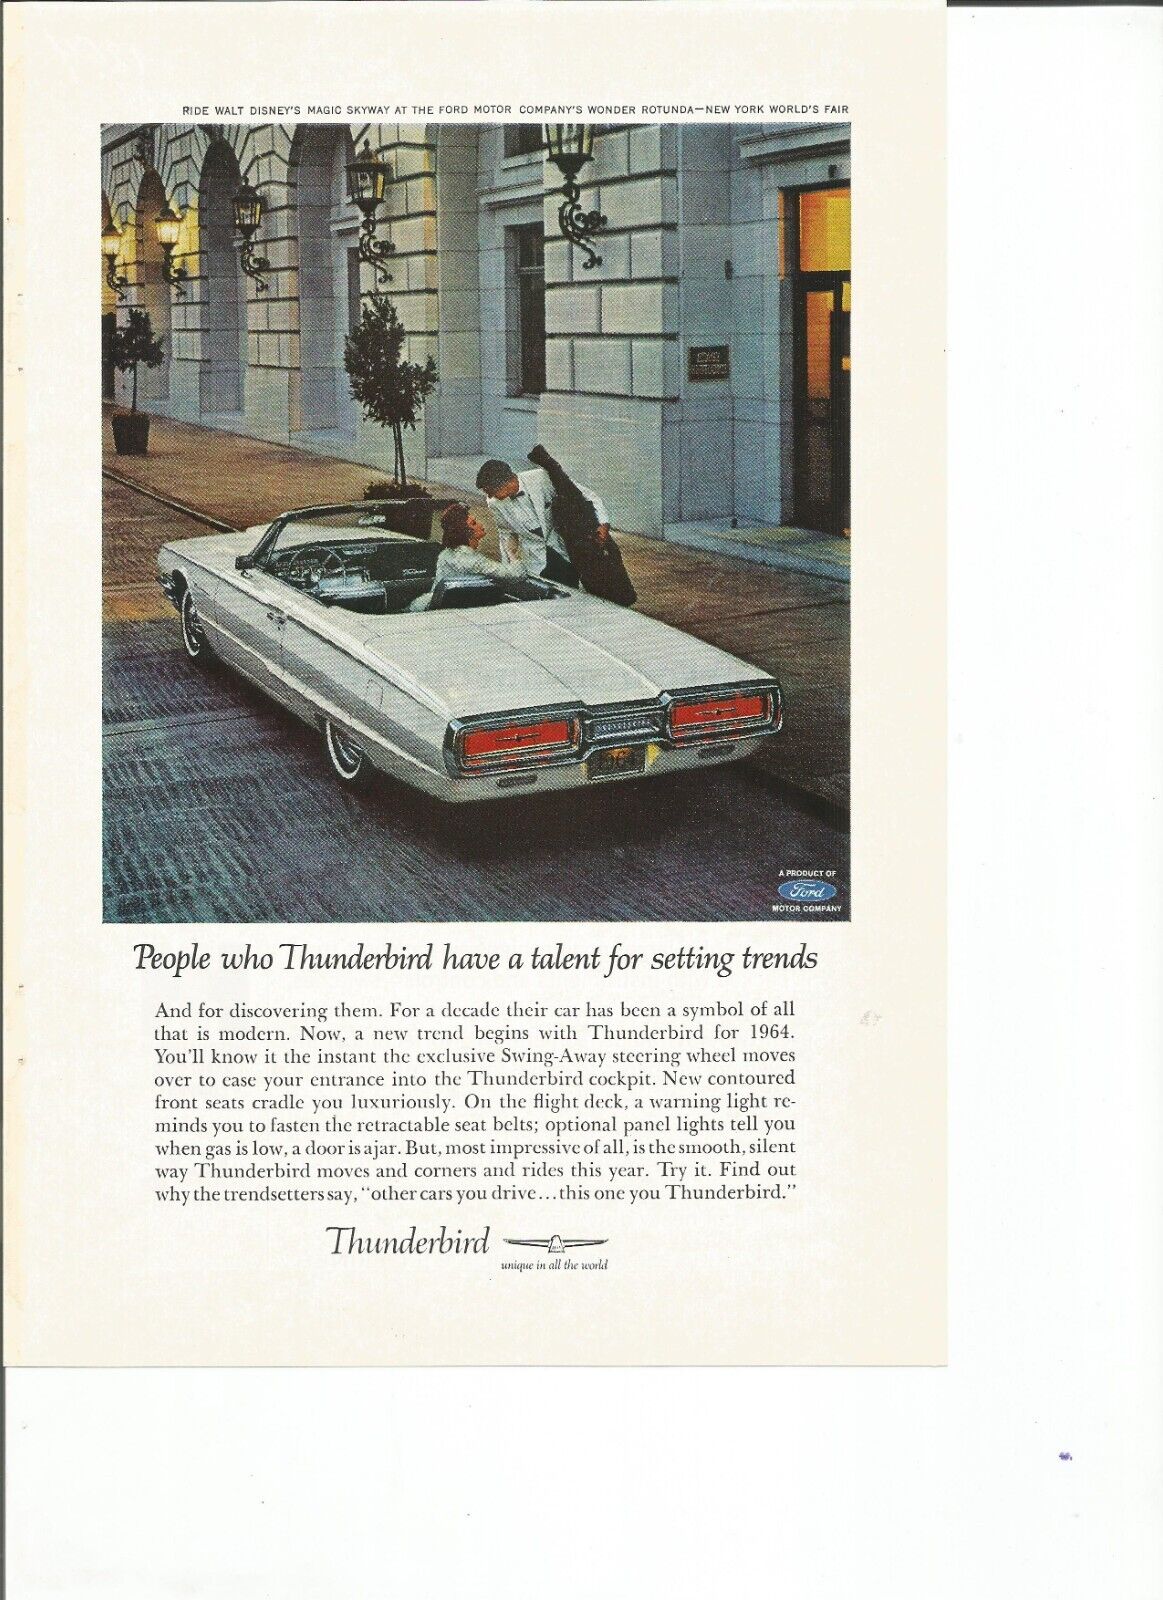 2 Original 1964 Ford Thunderbird vintage print ad (ads) Coupe or Convertible